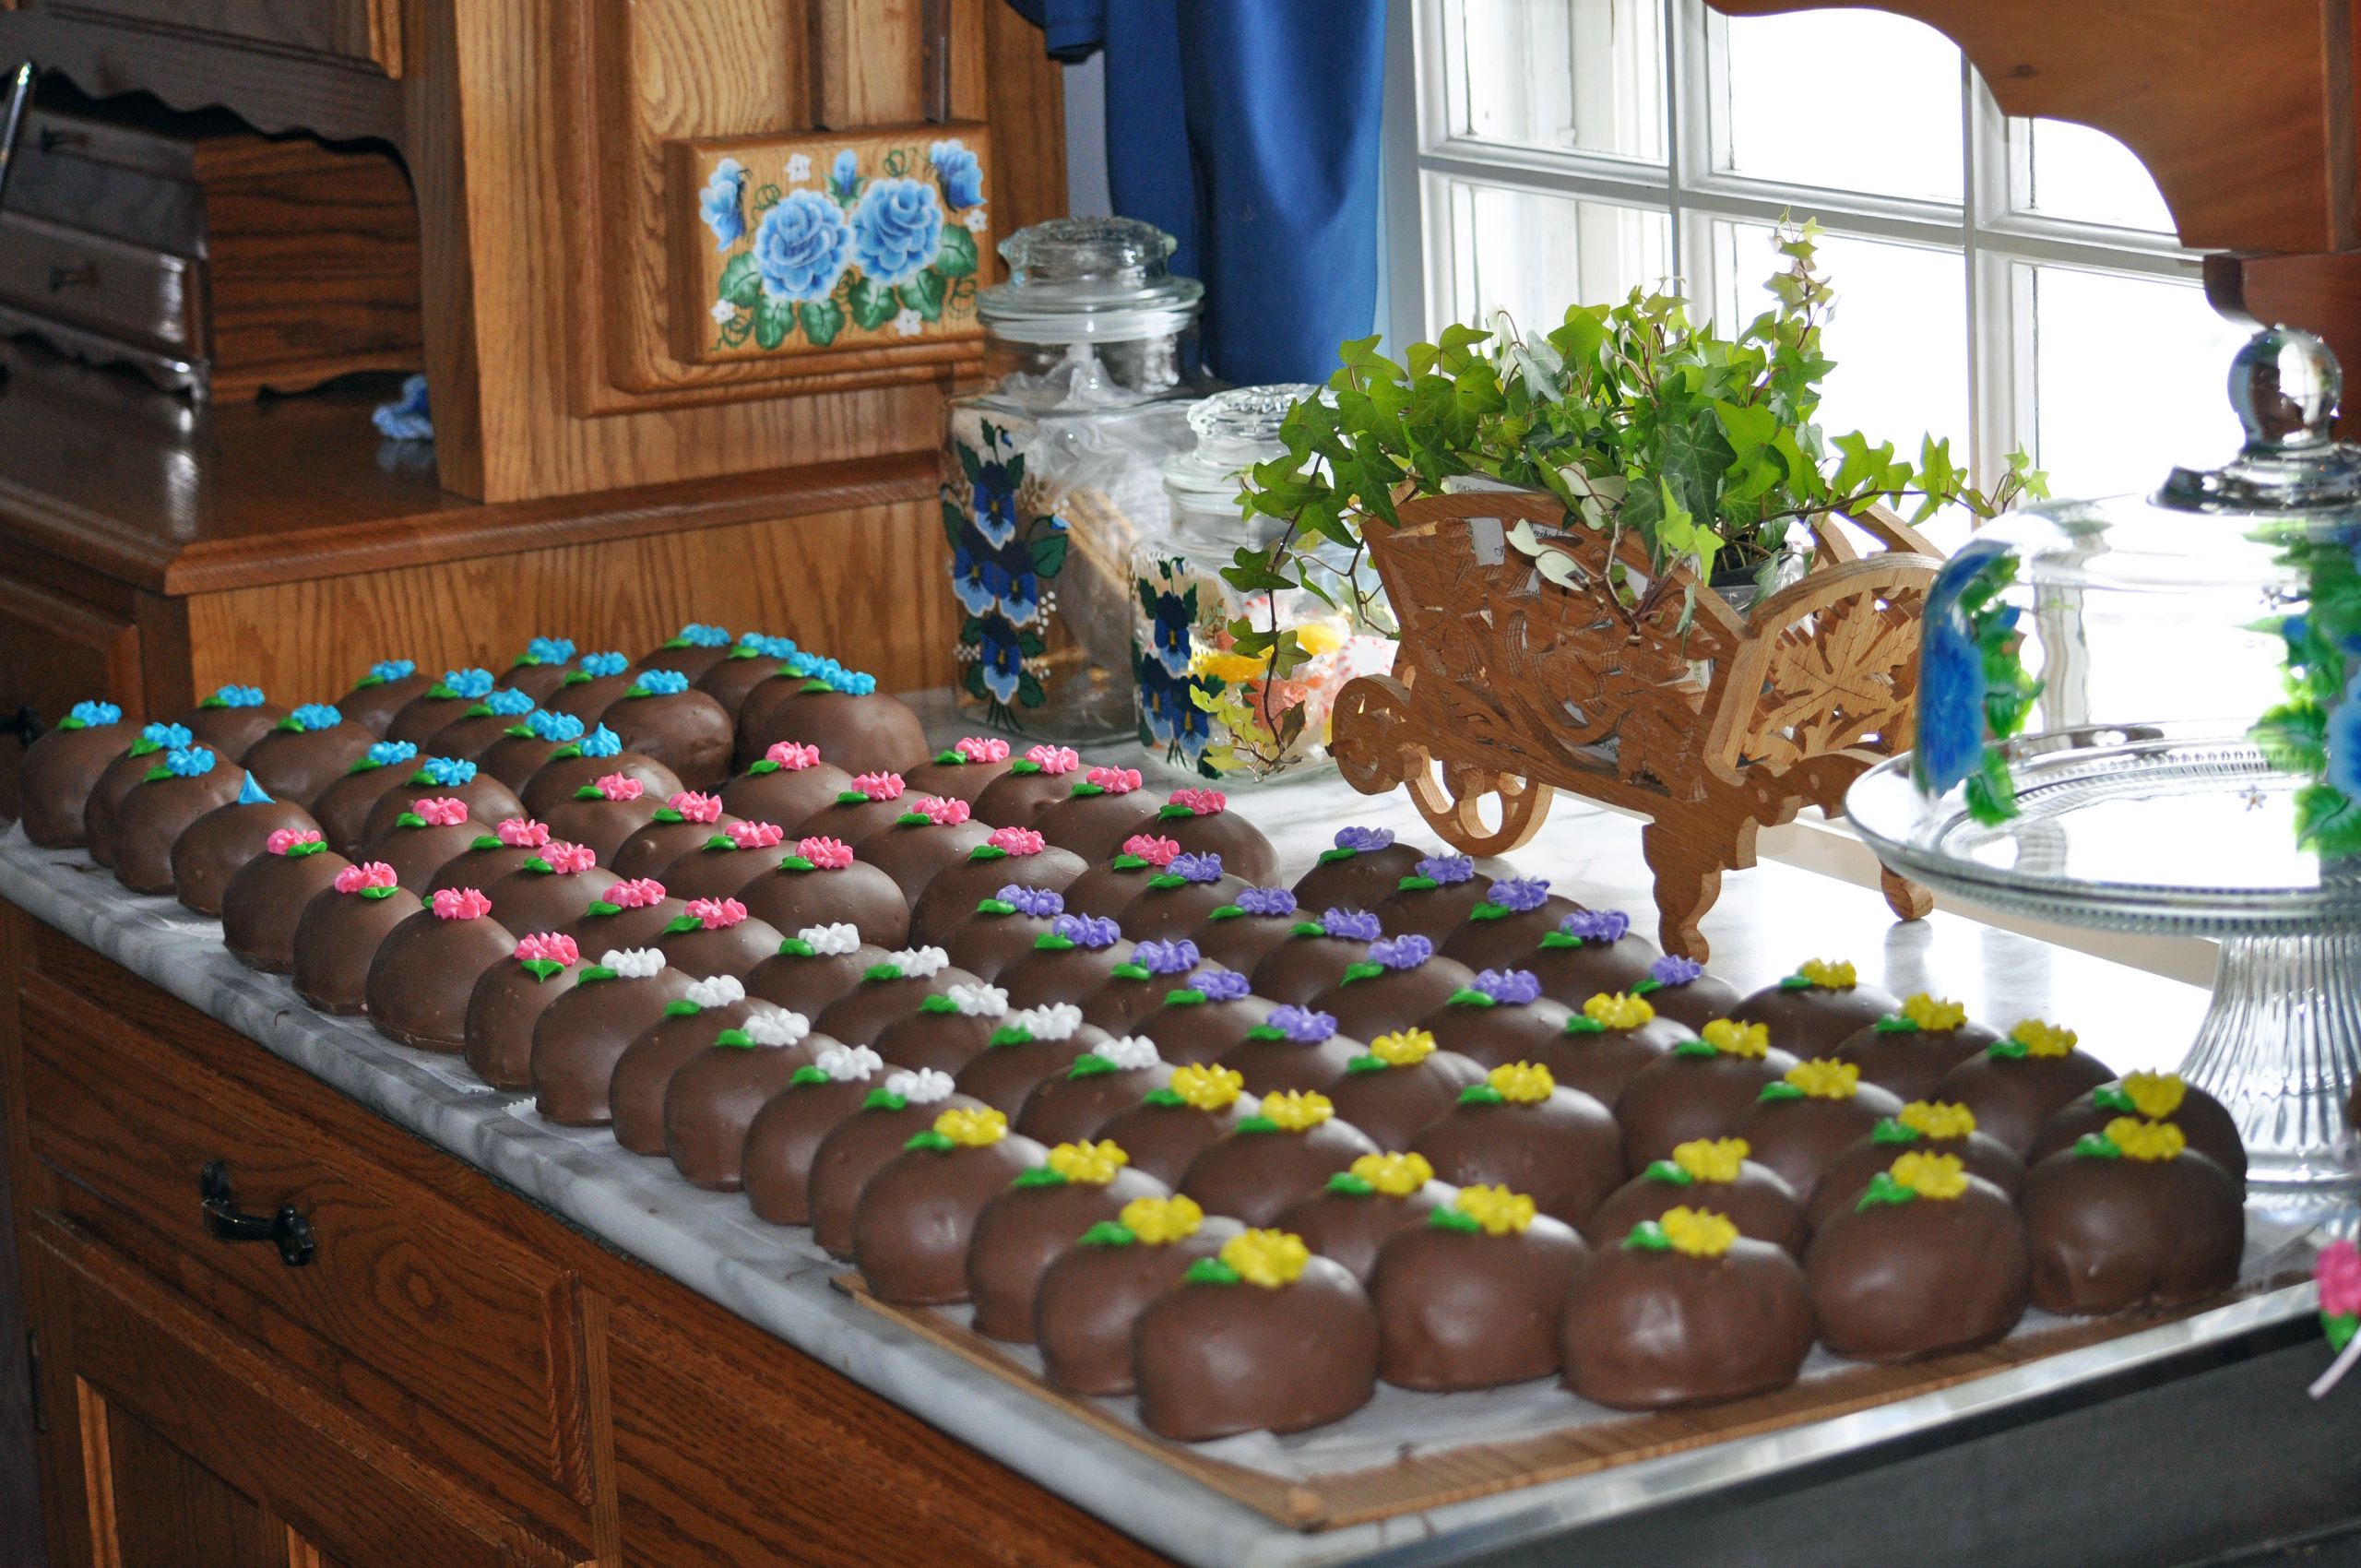 Candy Easter Eggs Recipe
 Homemade Chocolate Crunch Easter "Eggs"